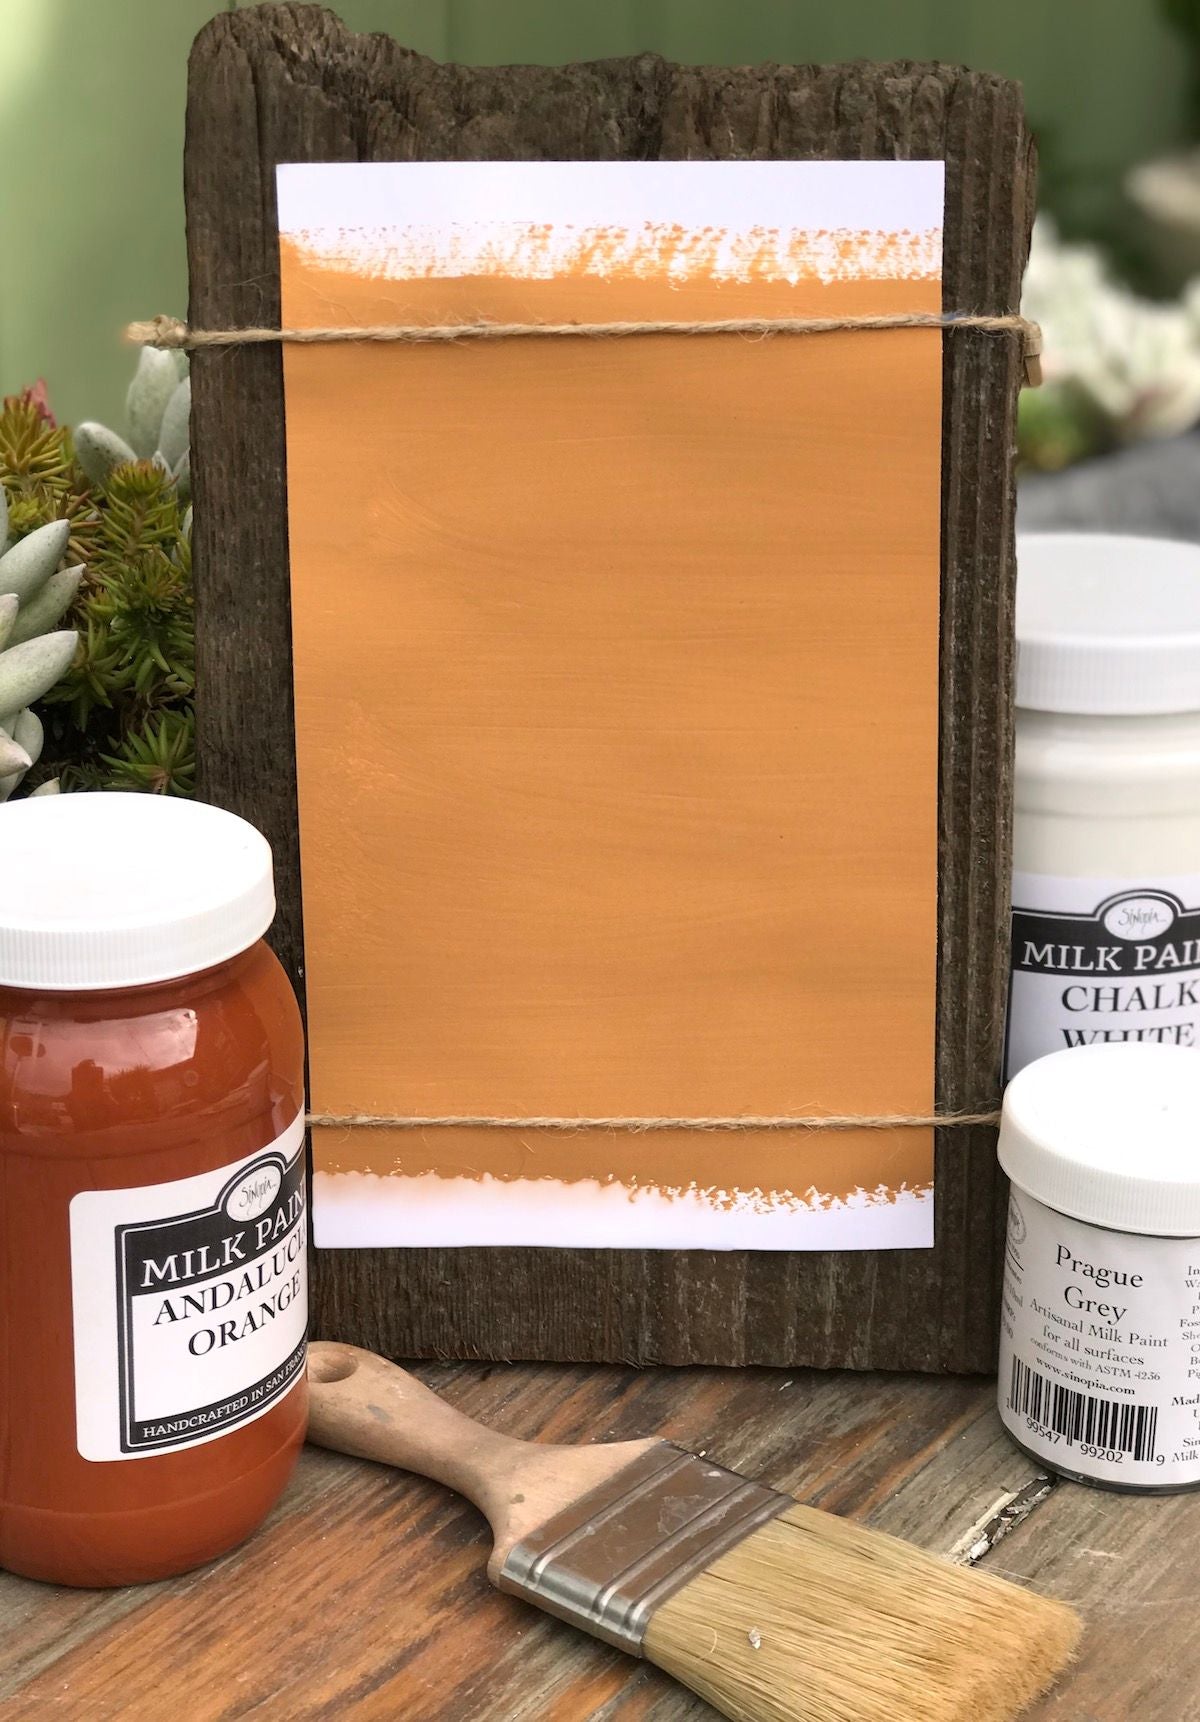 Milk Paint Sienna Orange is available at Natural Art Supplies